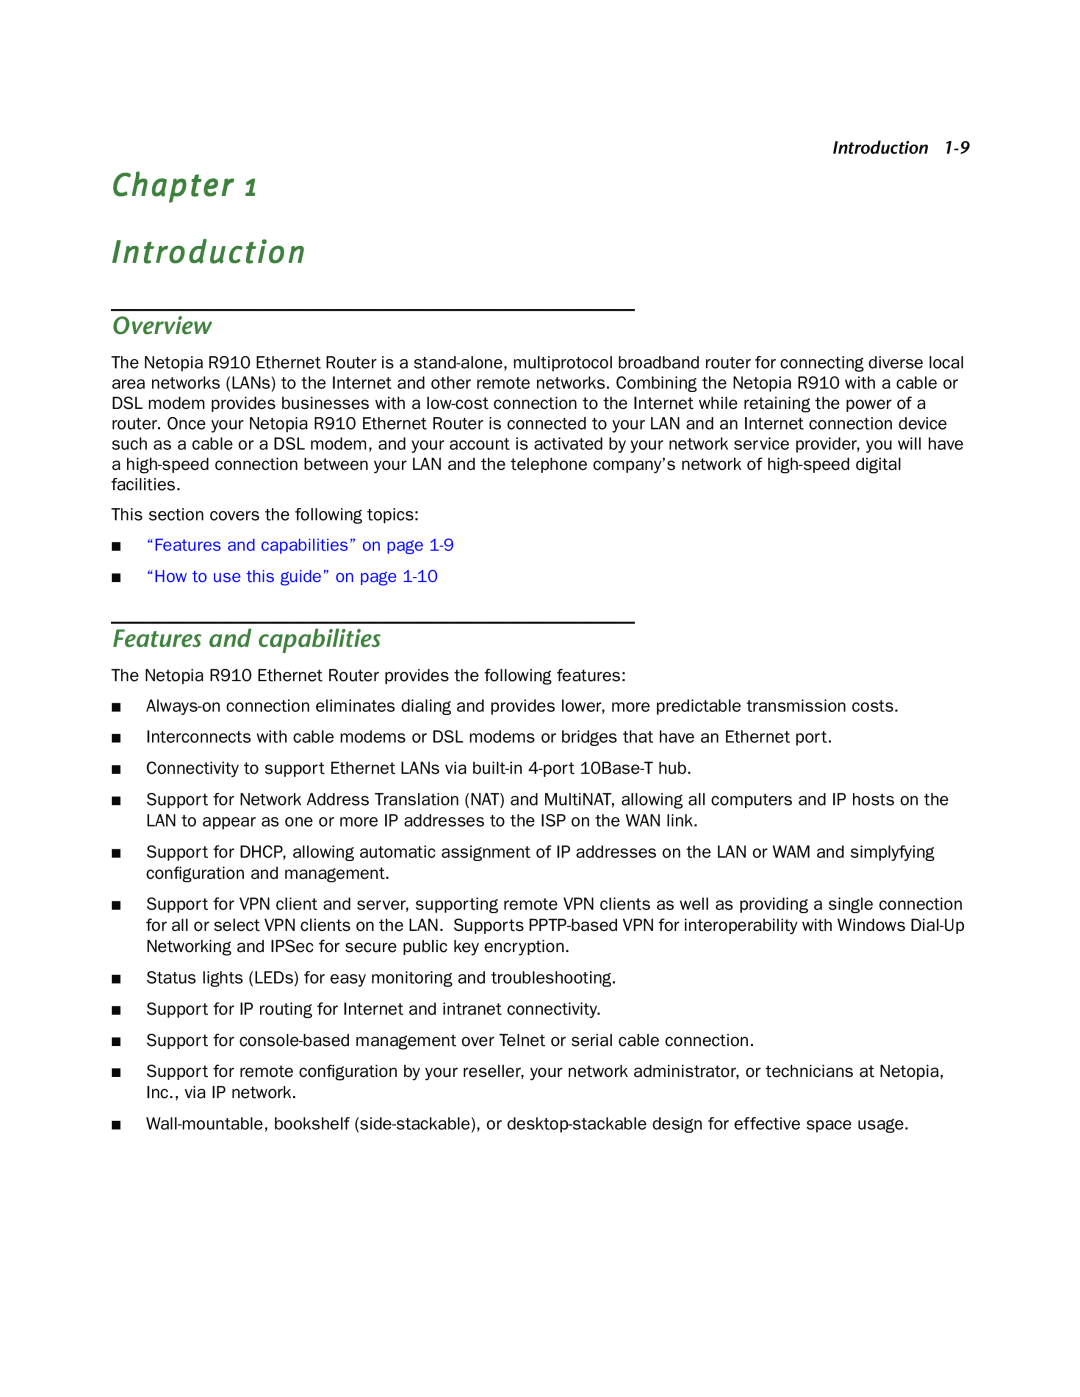 Netopia R910 manual Chapter Introduction, Overview, Features and capabilities 